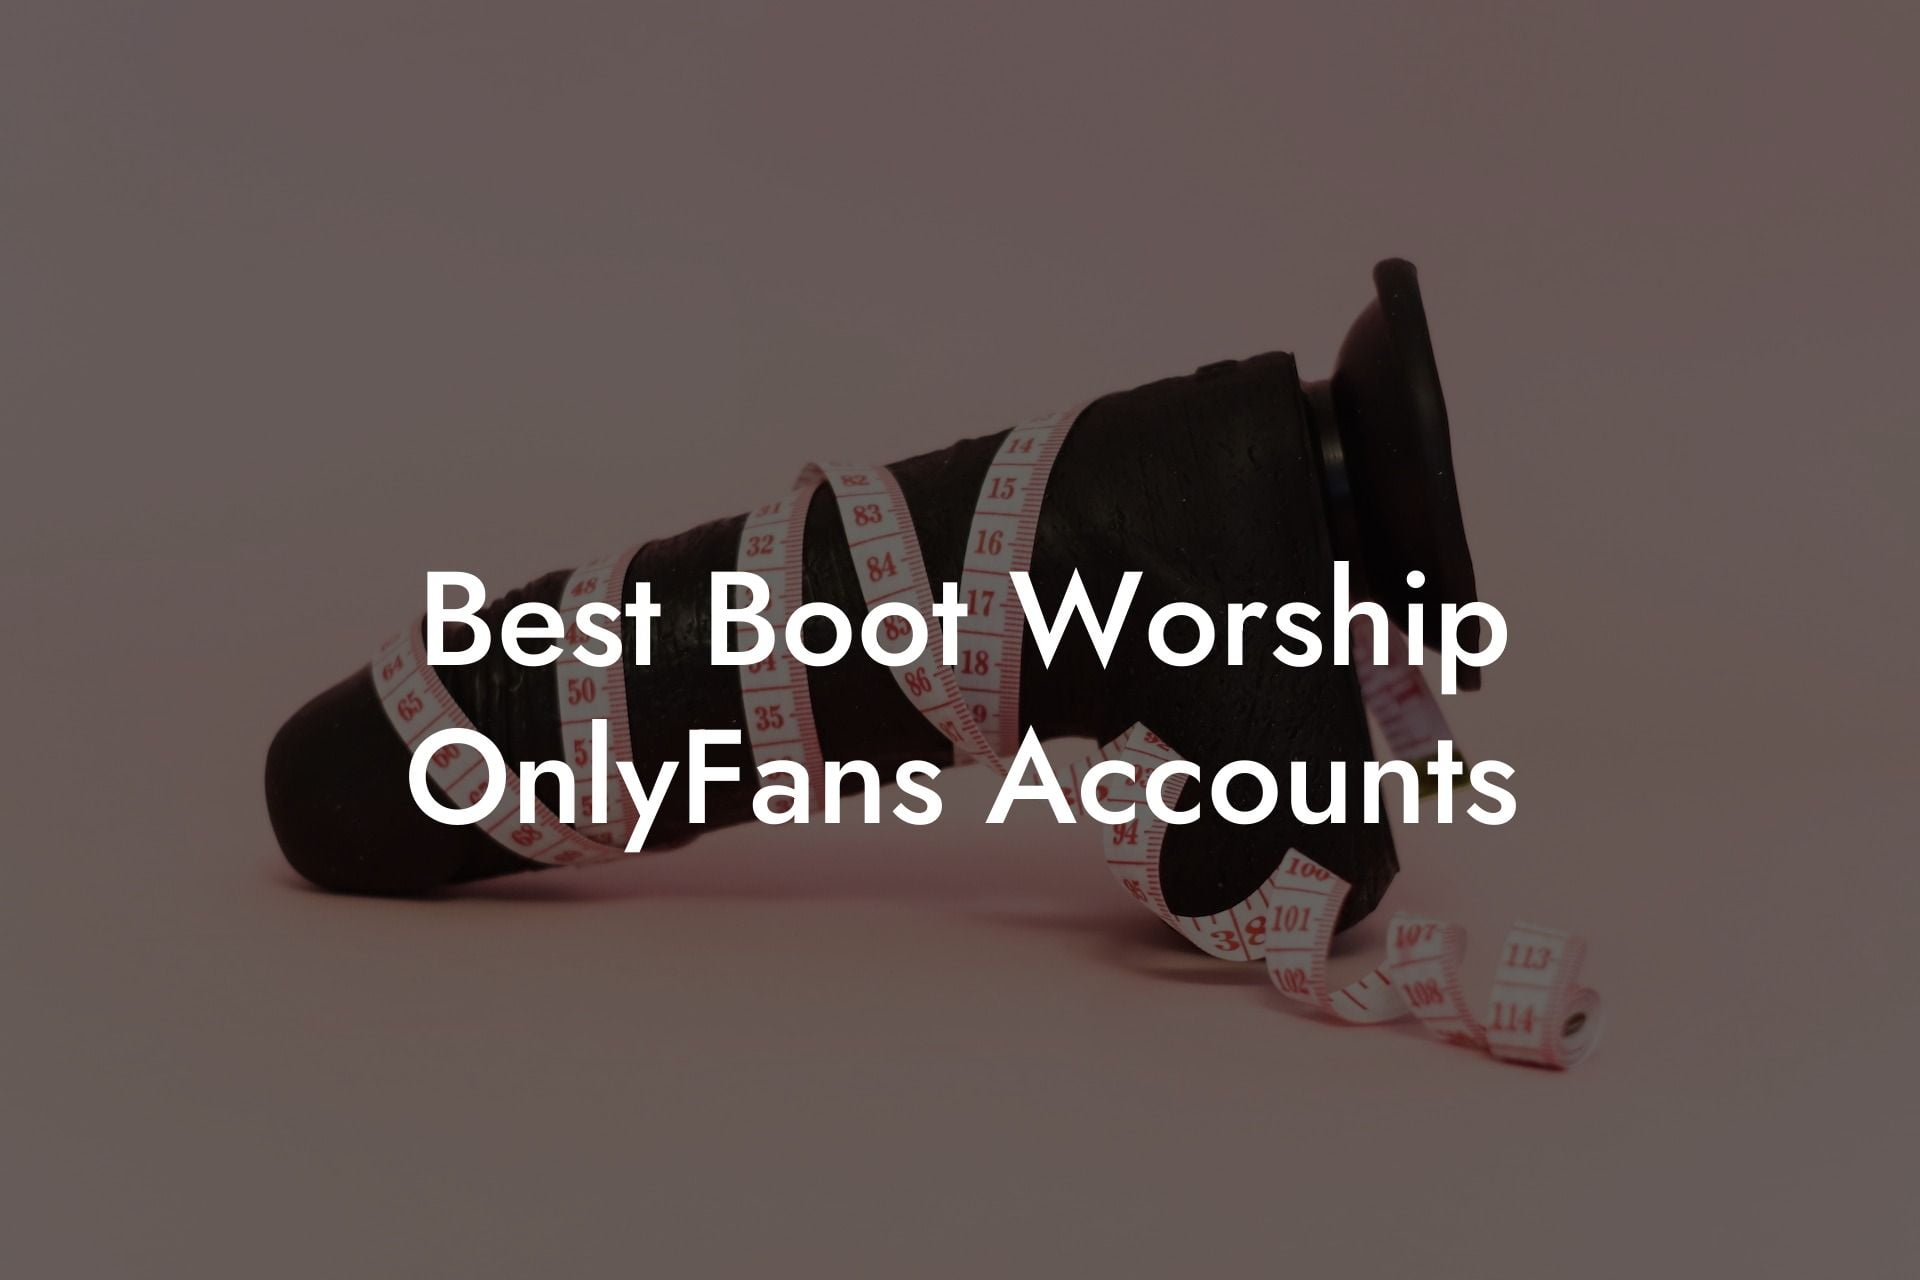 Best Boot Worship OnlyFans Accounts